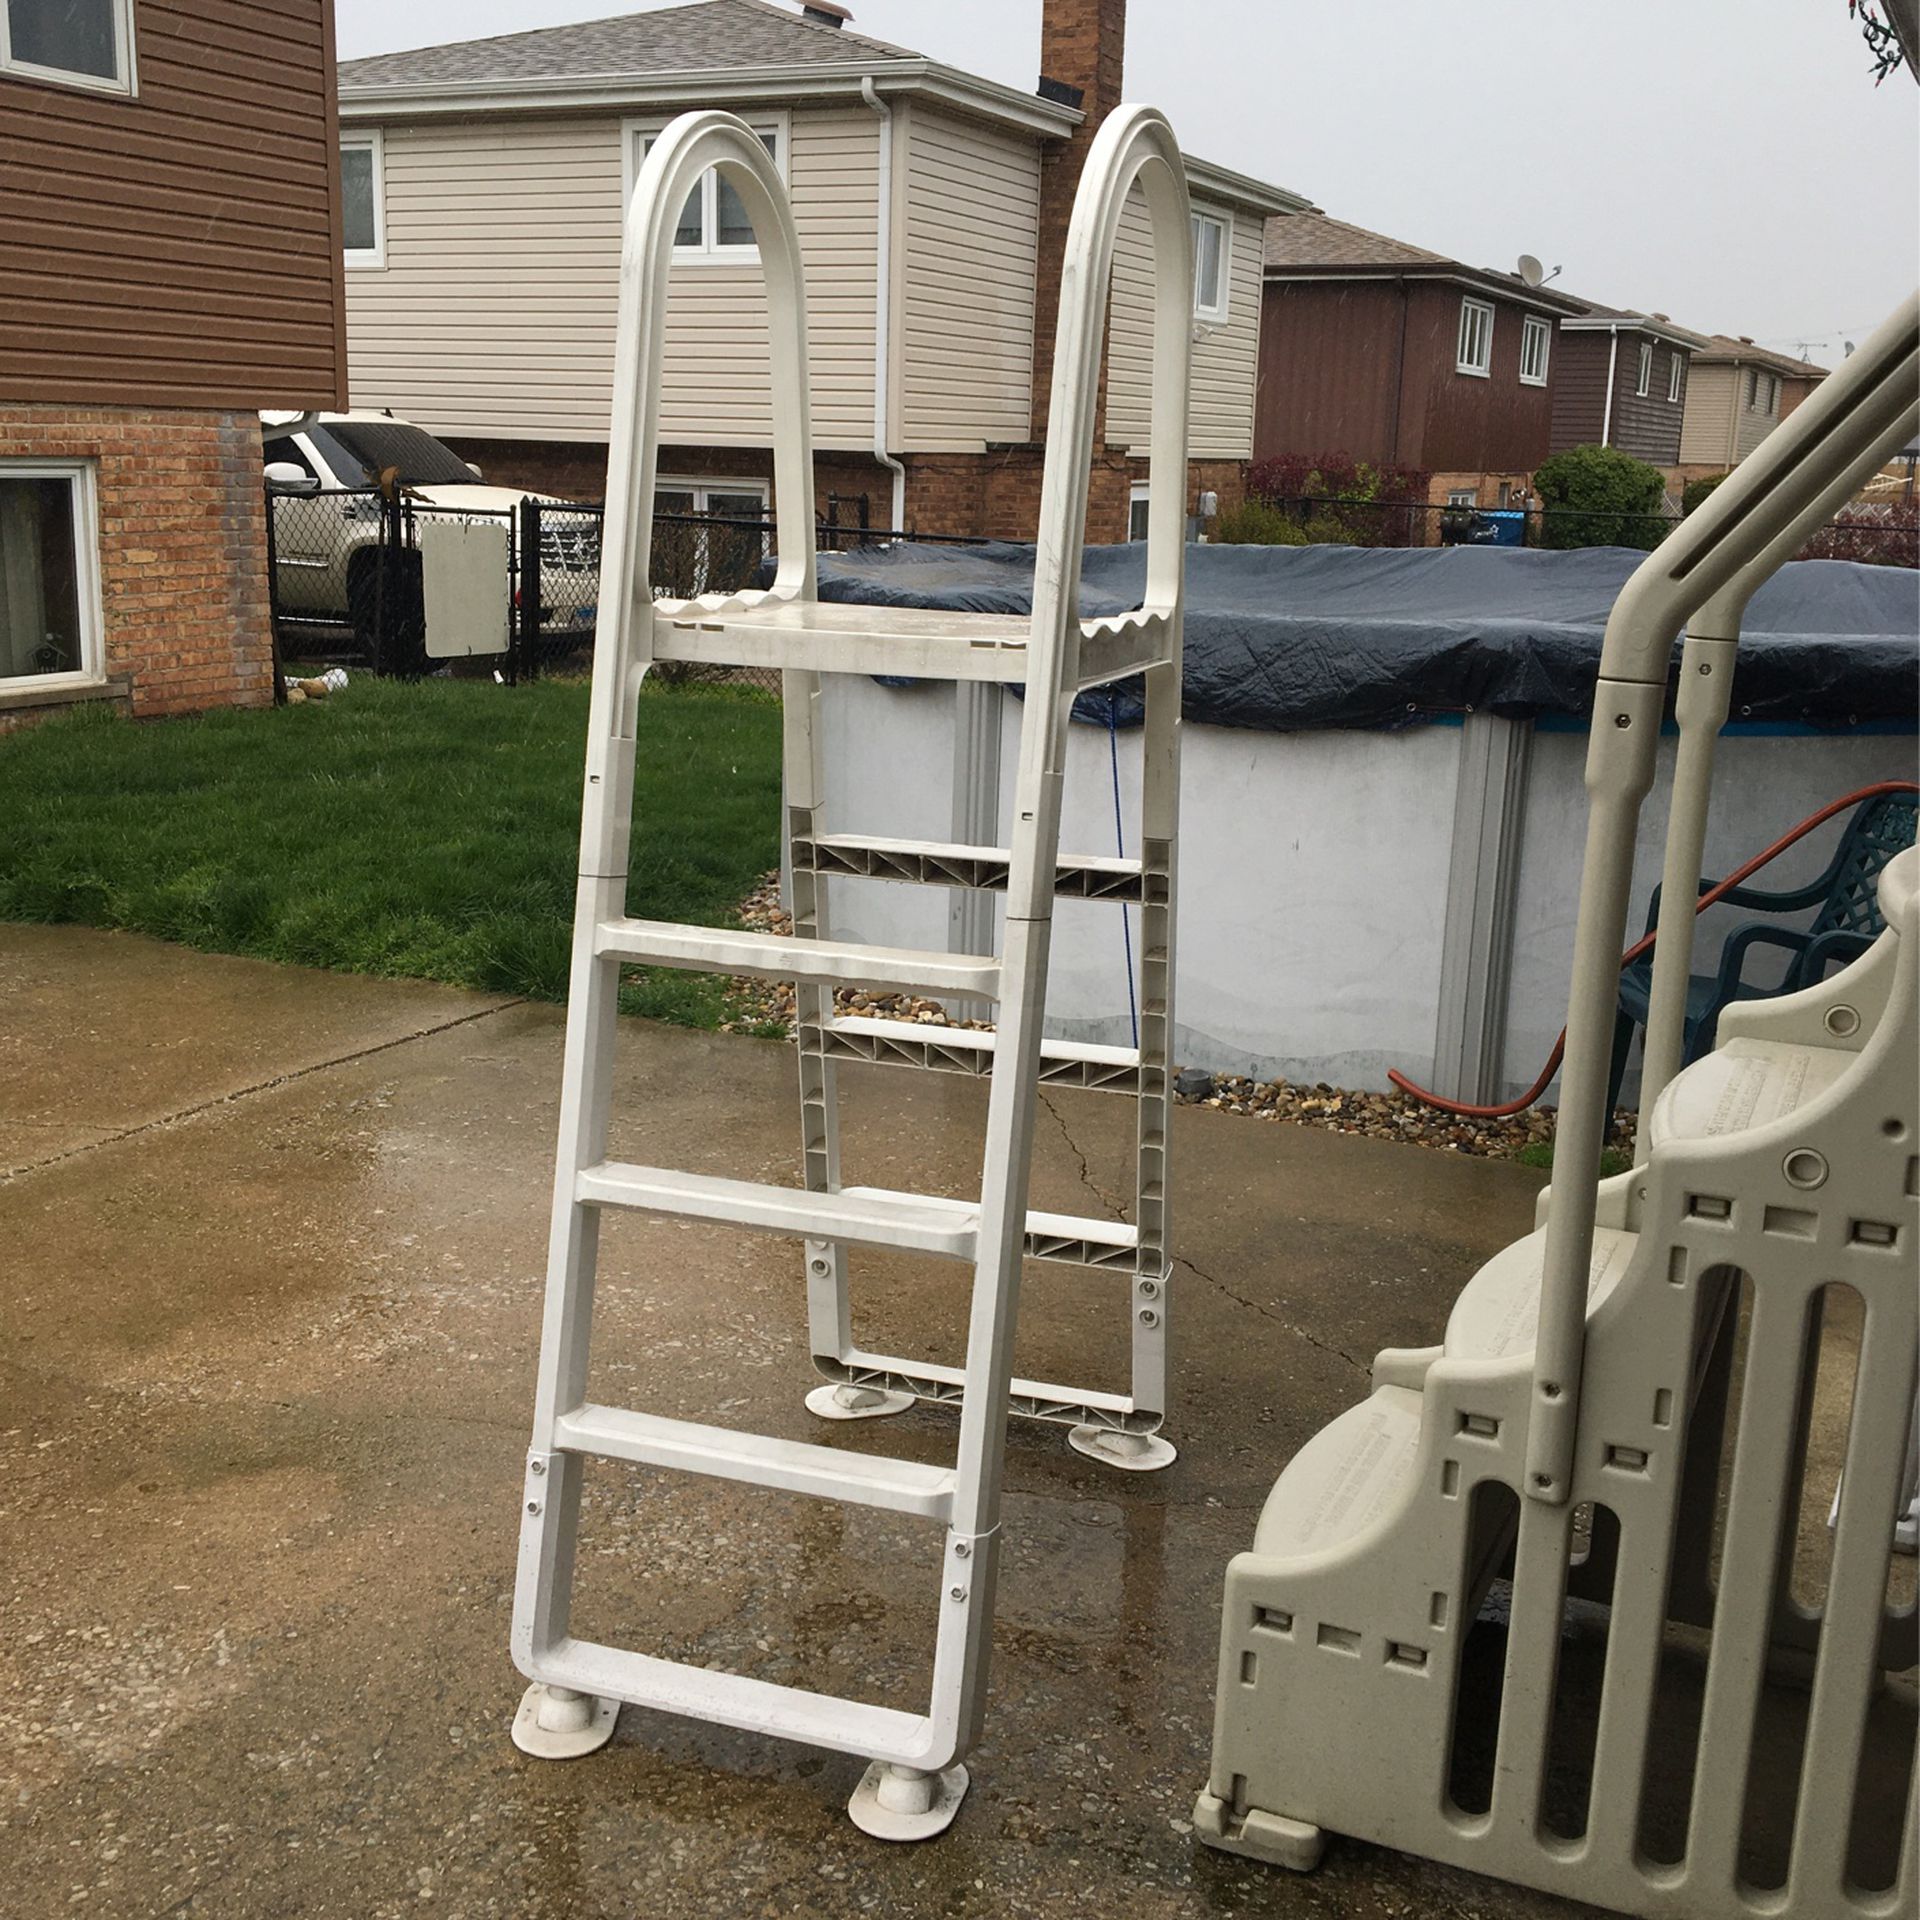 Swimming Pool Ladder 53 Inches High With Hundred dollars